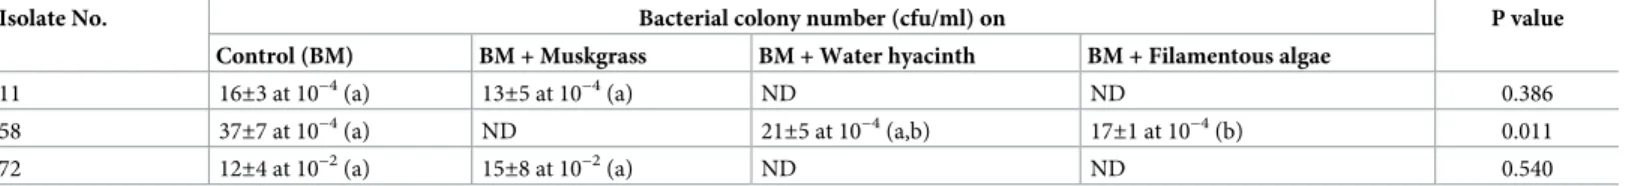 Table 2. Comparison of bacterial colony numbers (colony forming units/ml or cfu/ml) of three bacterial isolates on dilution plates of basal medium (BM) and BM supplemented with aquatic weed extracts (1:100 dilution).